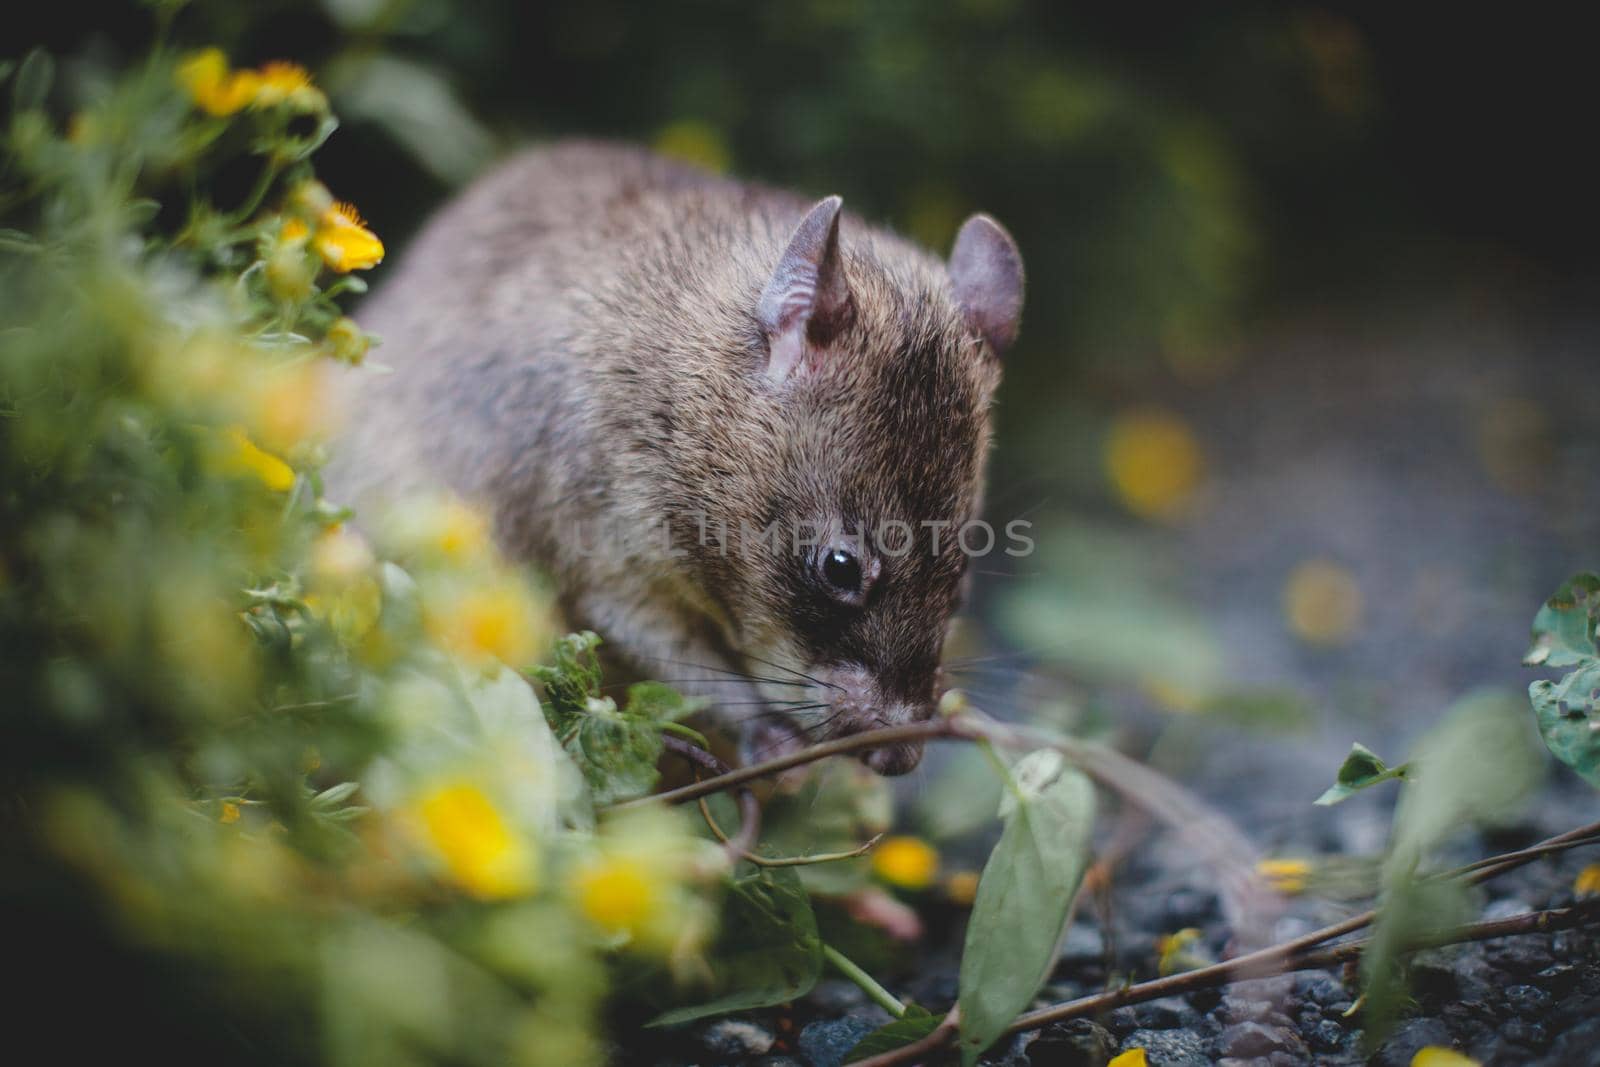 Giant african pouched rat or crycetomys gambianus in a garden with pansies